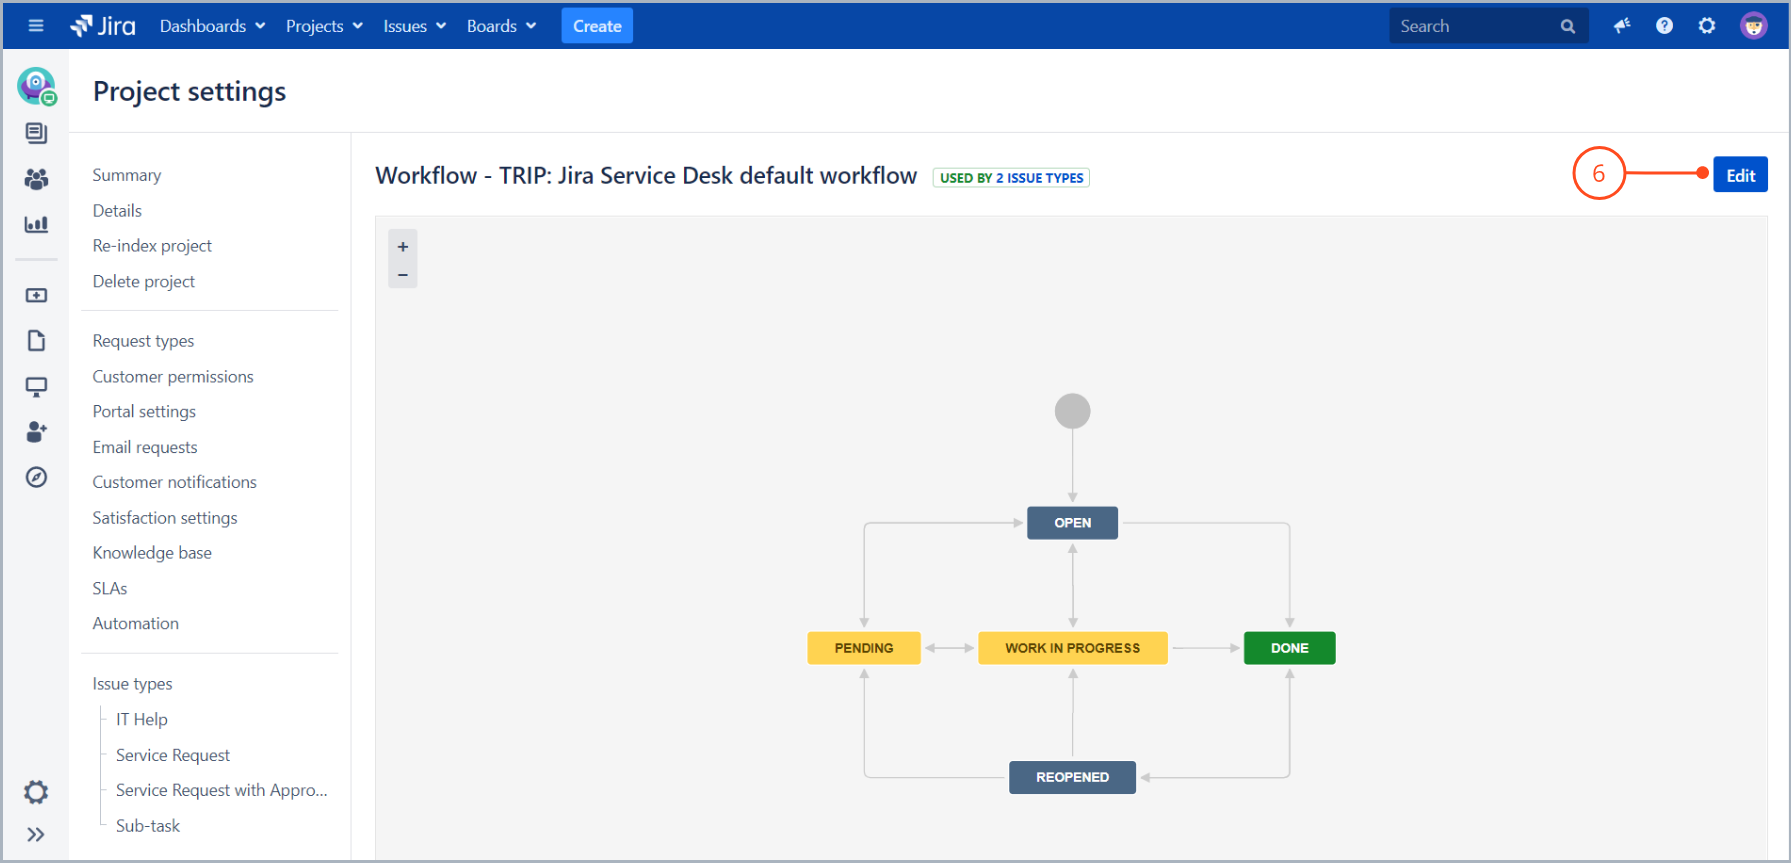 Go to edit Jira Service Management workflow to create a transition with approval